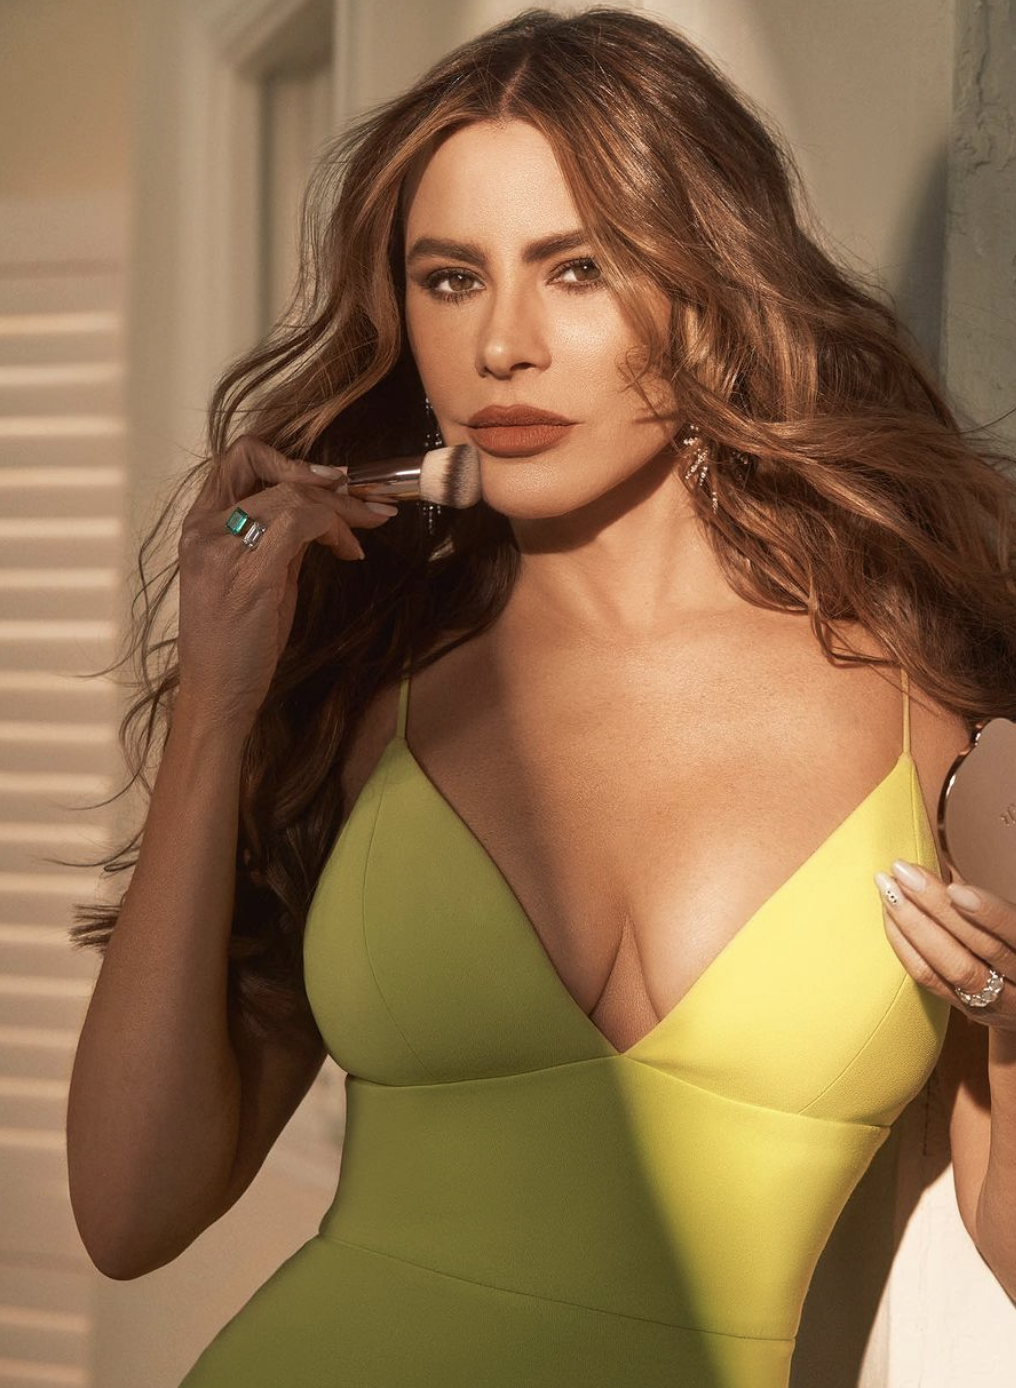 Sofia Vergara is considered a sex symbol of Colombia.